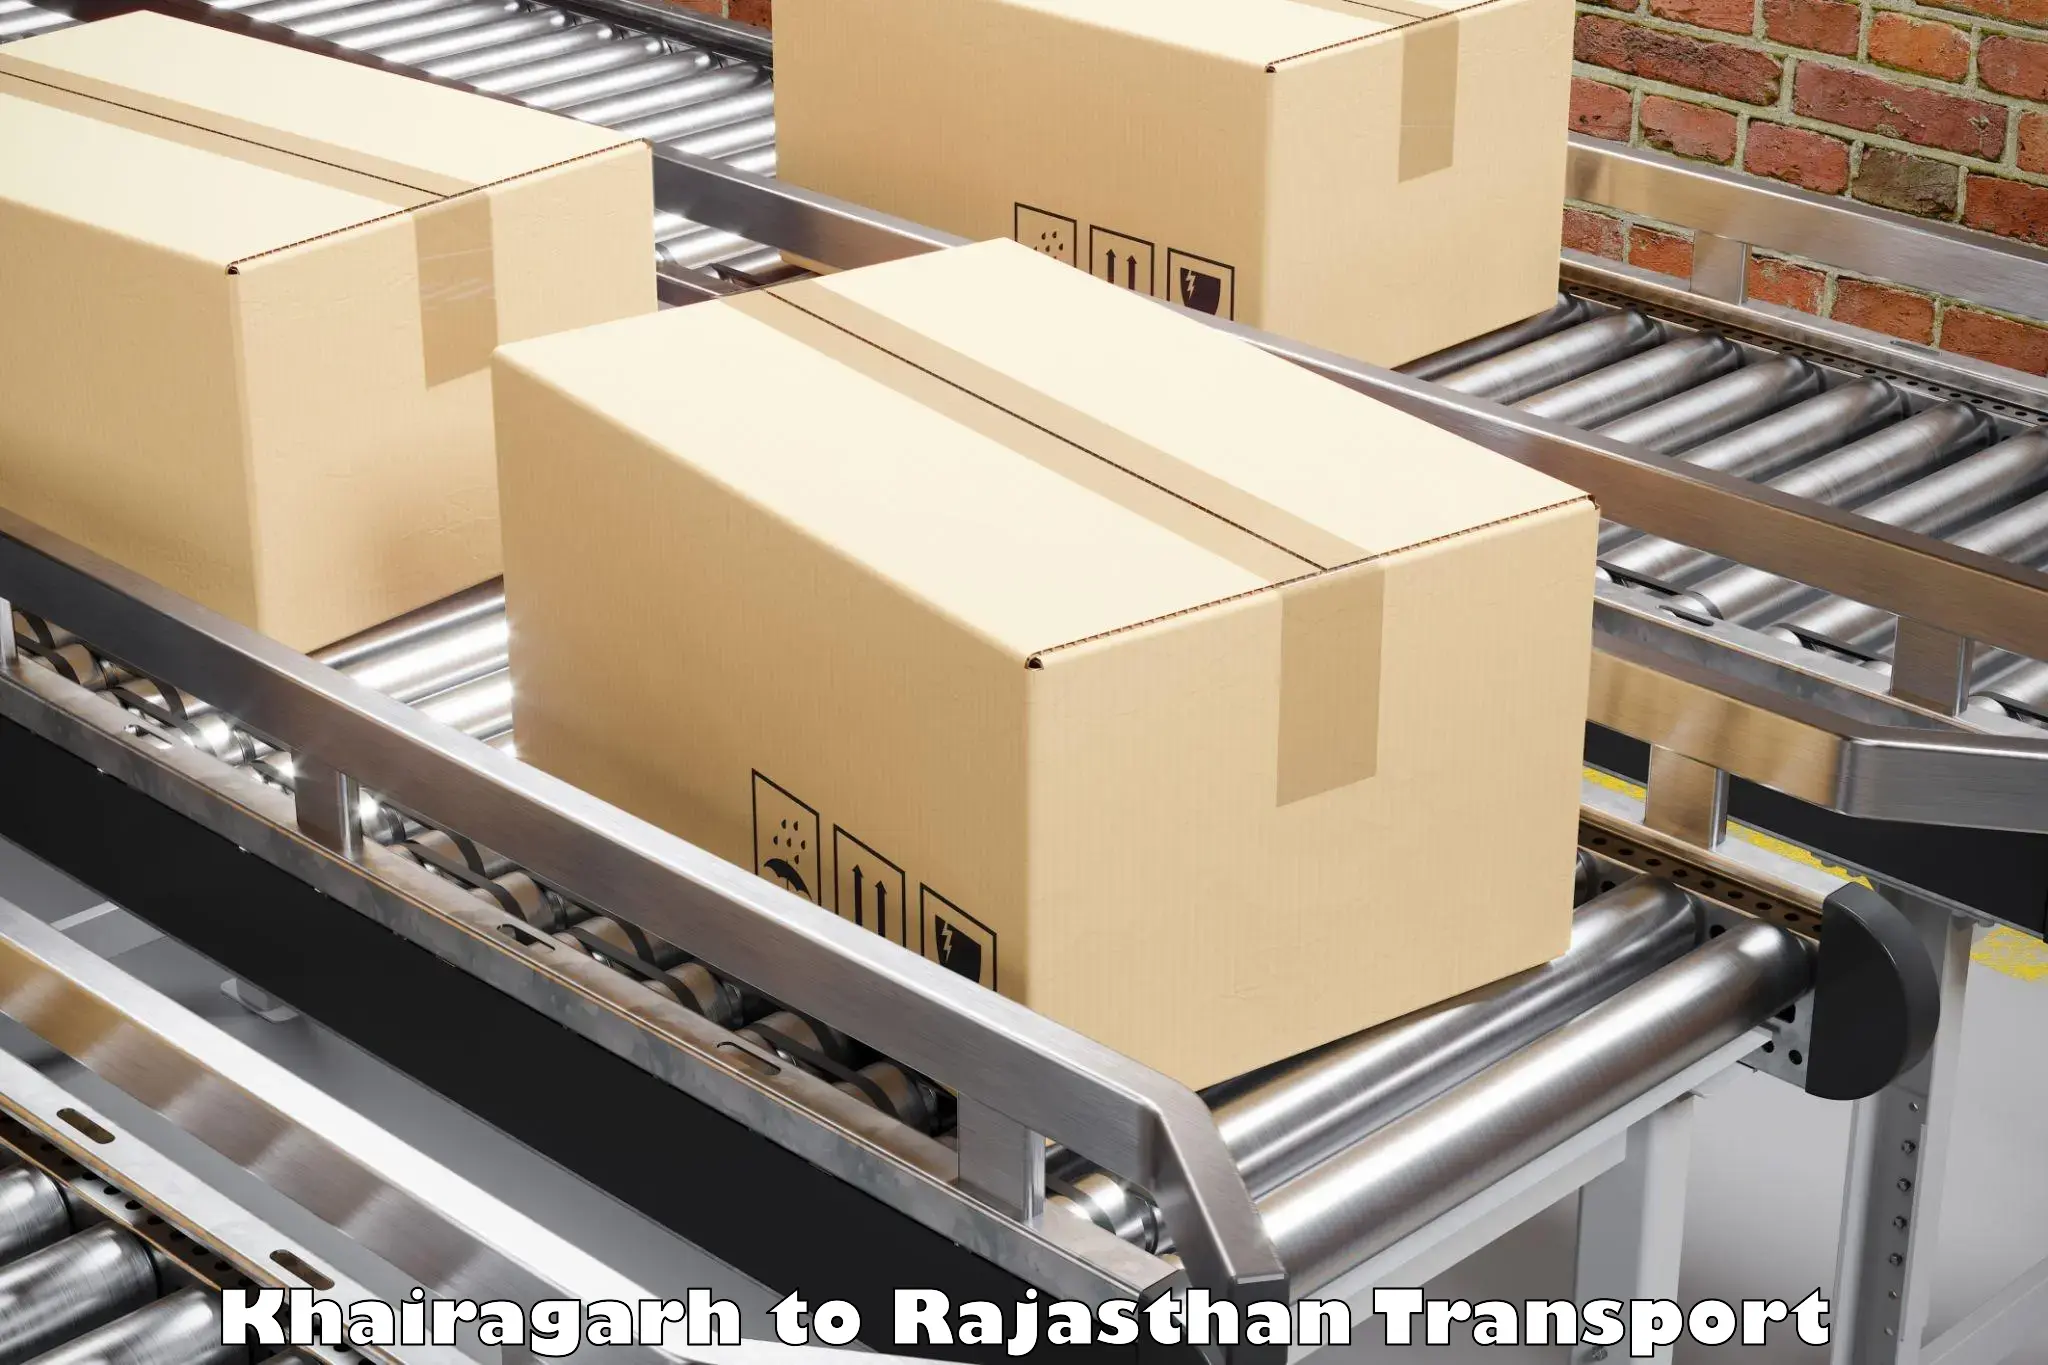 Container transportation services in Khairagarh to Kumbhalgarh